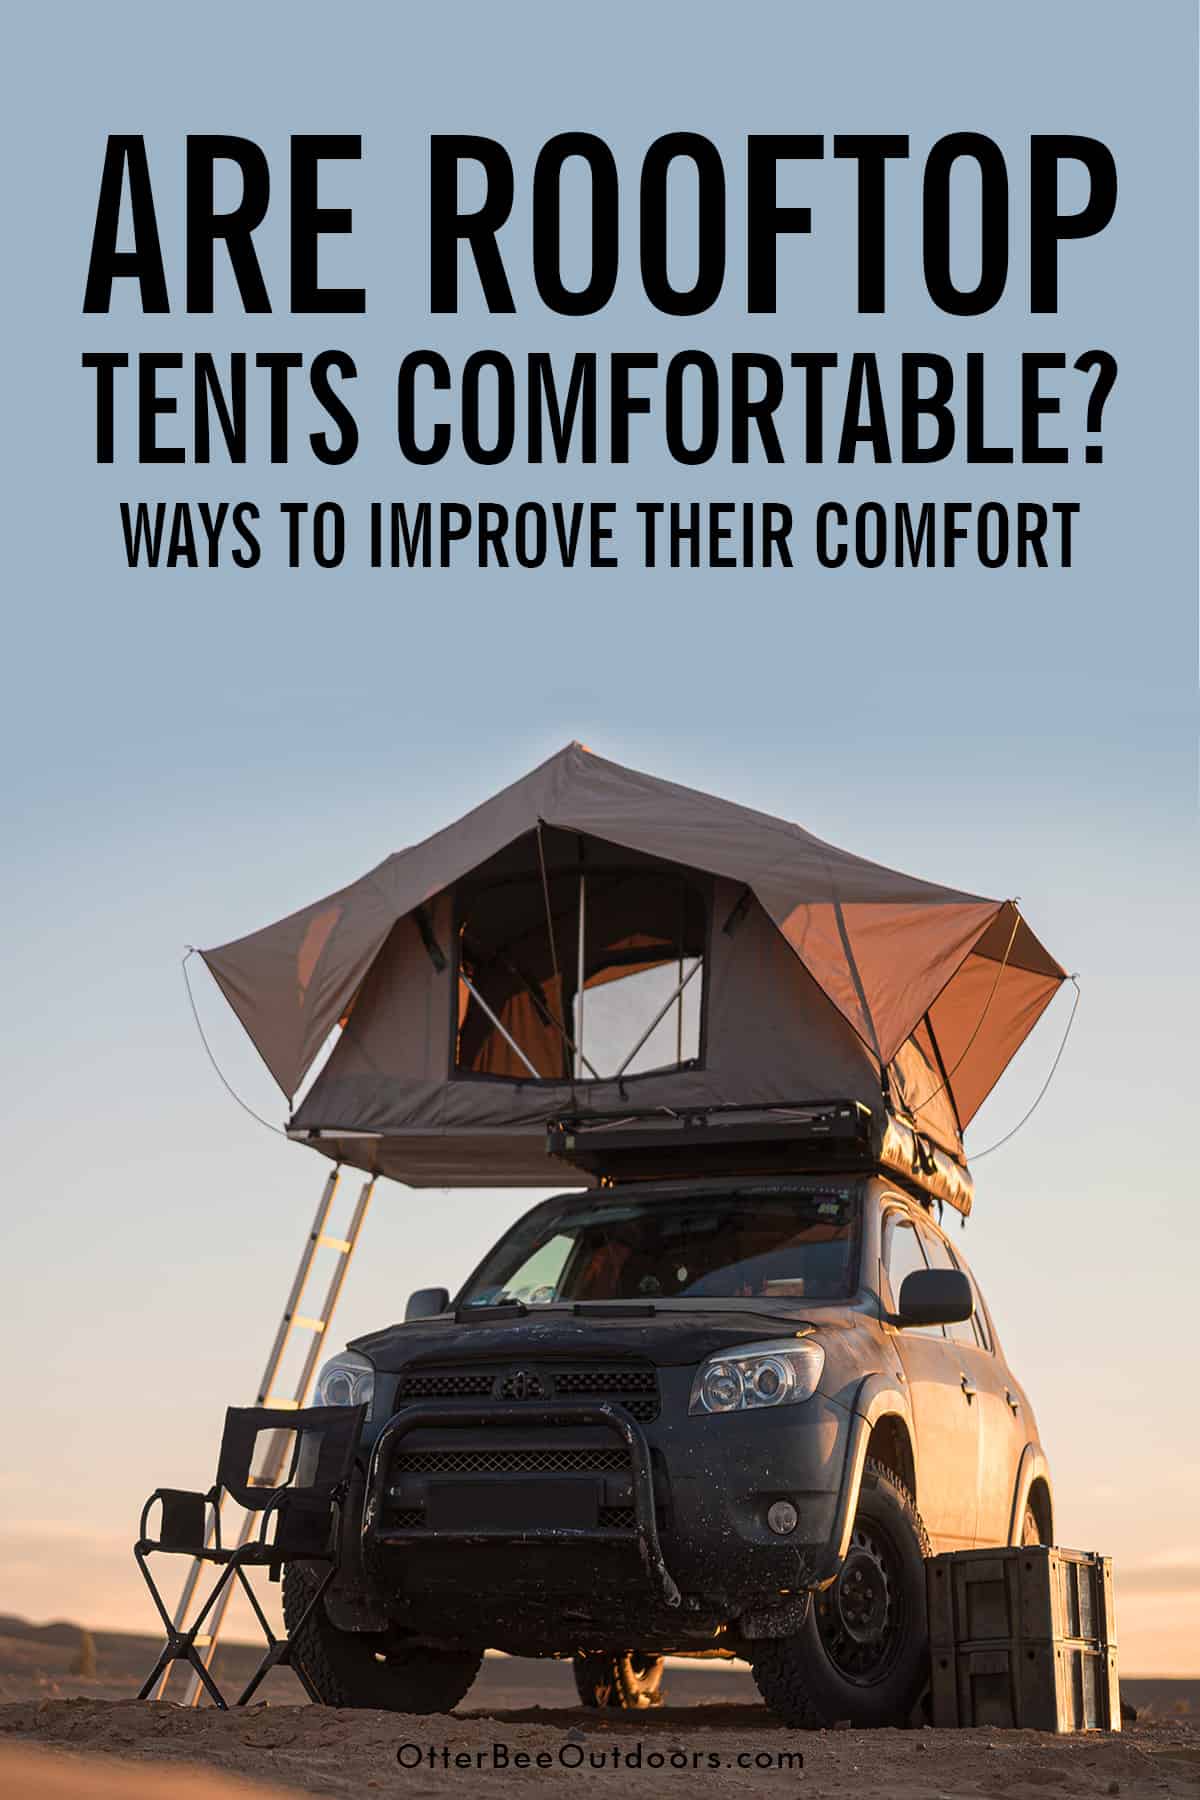 Camping in the desert with a soft shell roof top tent. The graphic asks... Are rooftop tents comfortable?... Ways to improve their comfort.